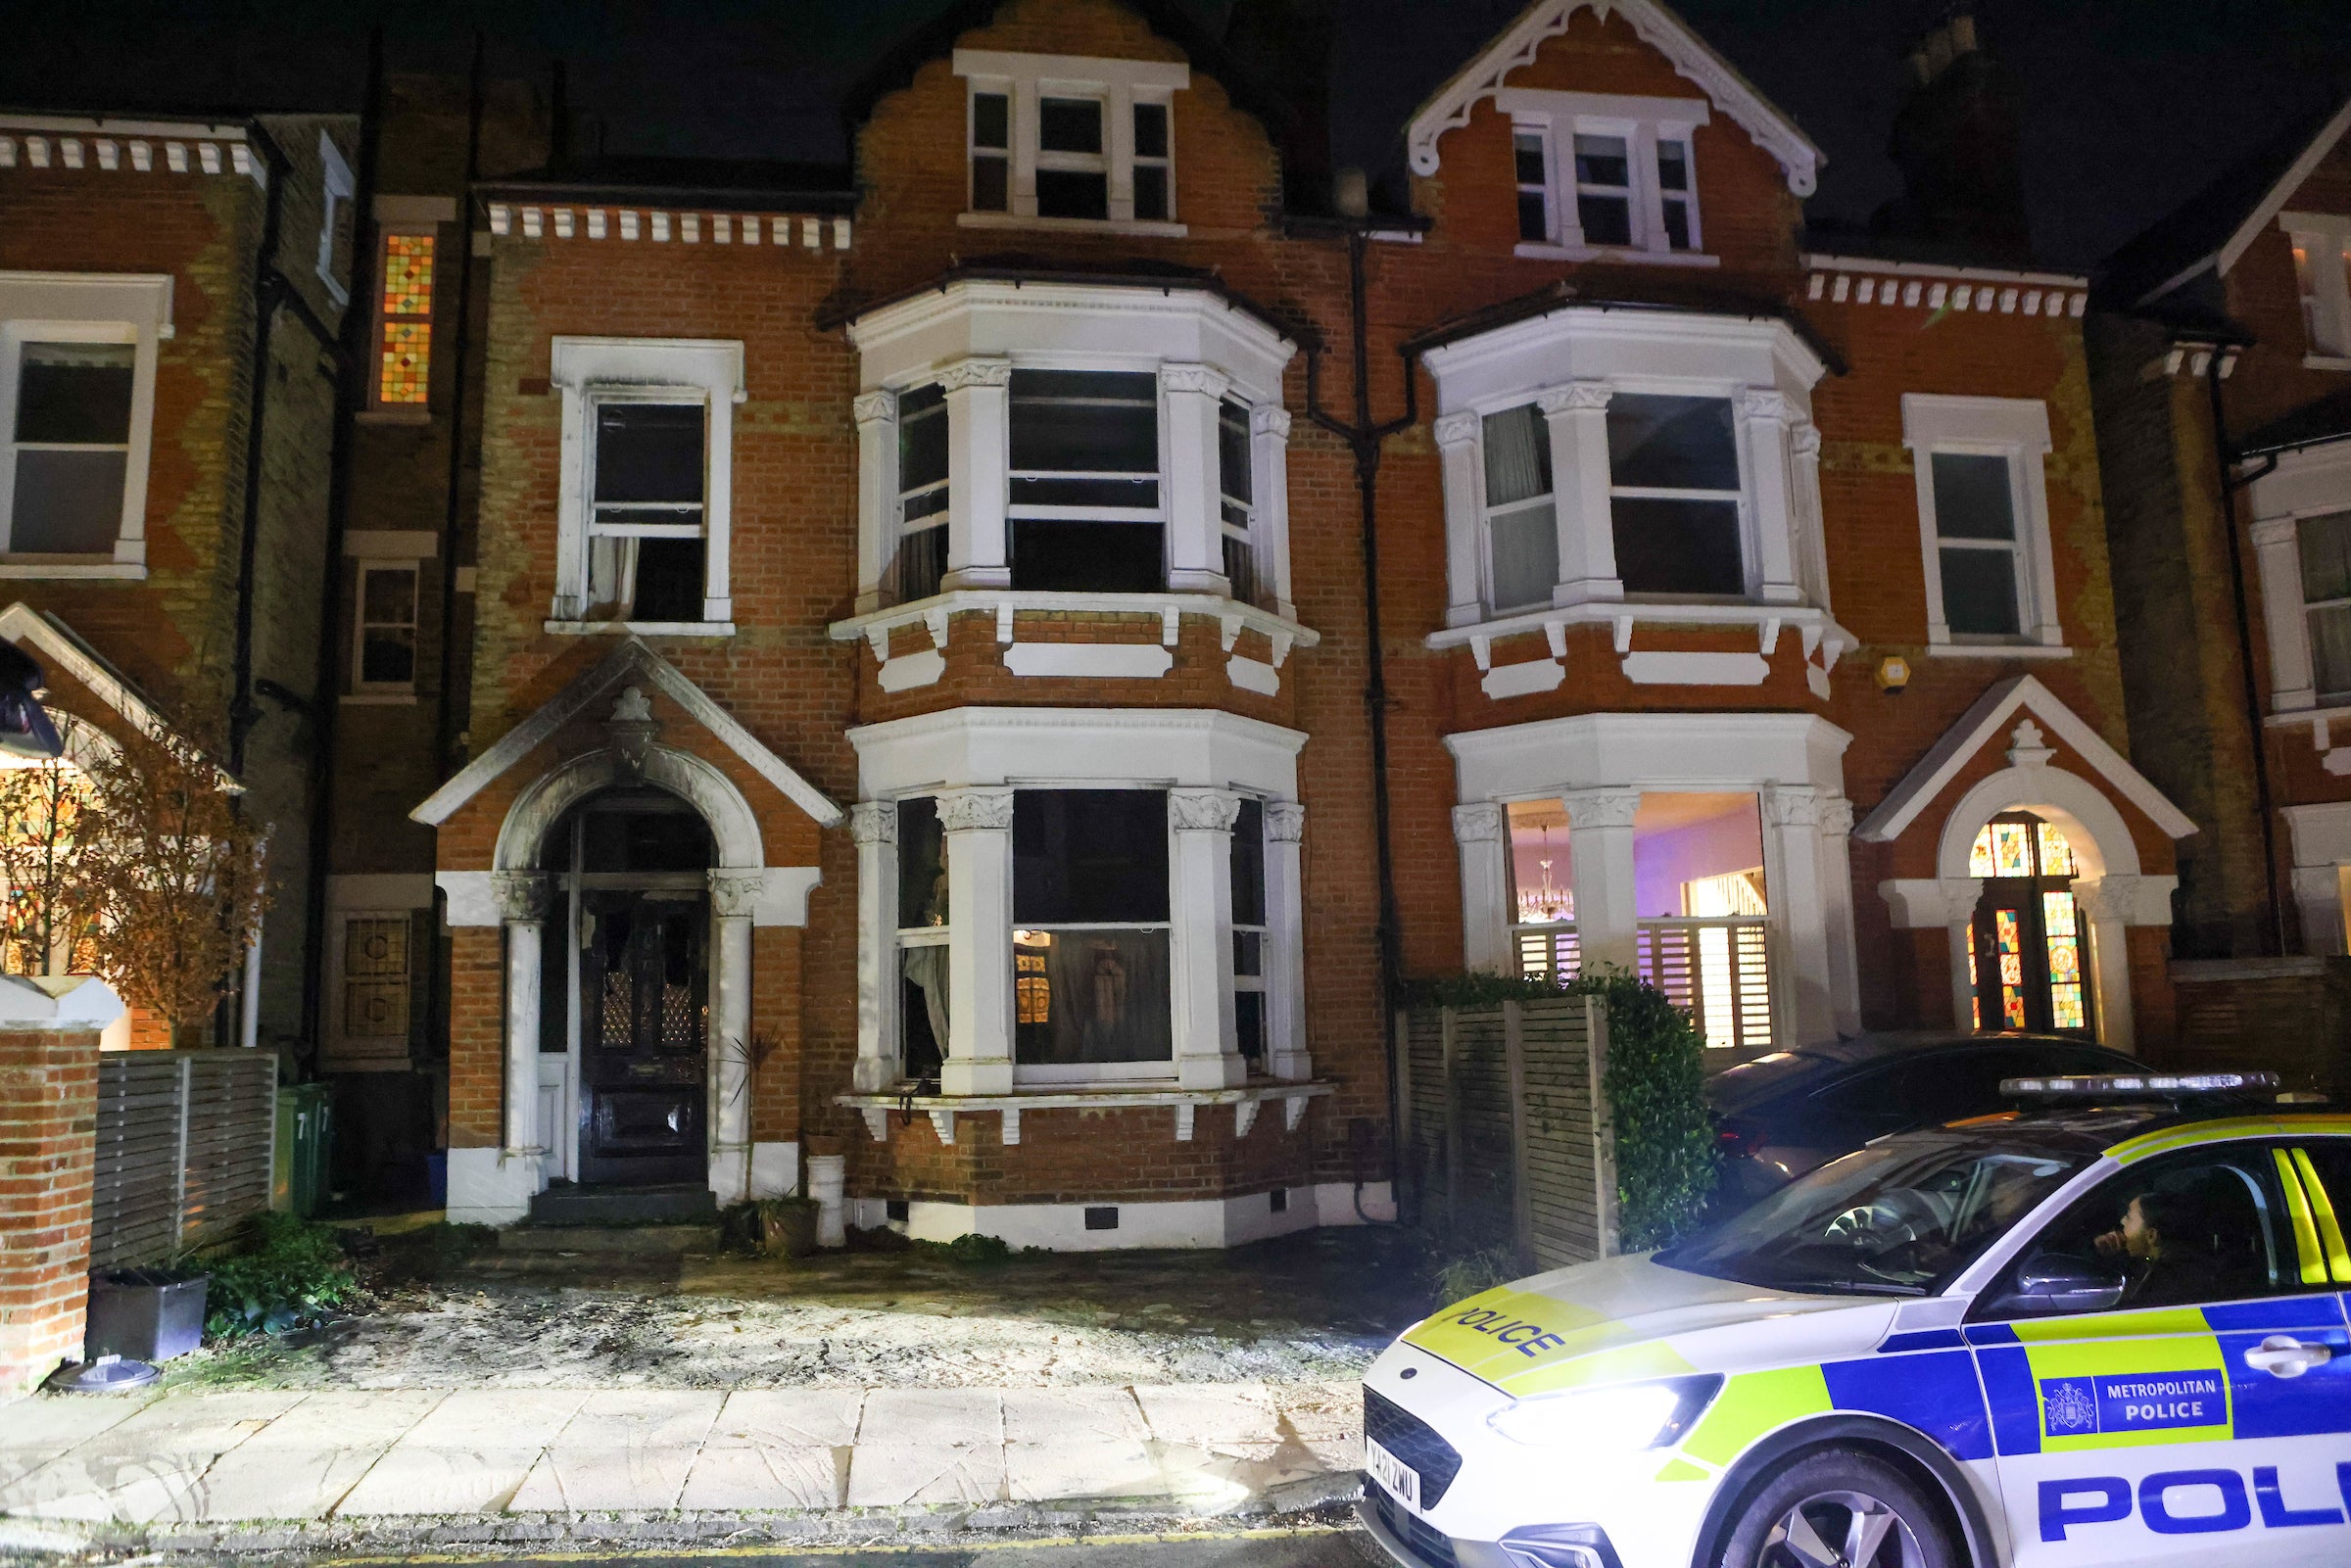 A pensioner has been pronounced dead after a house fire in Richmond